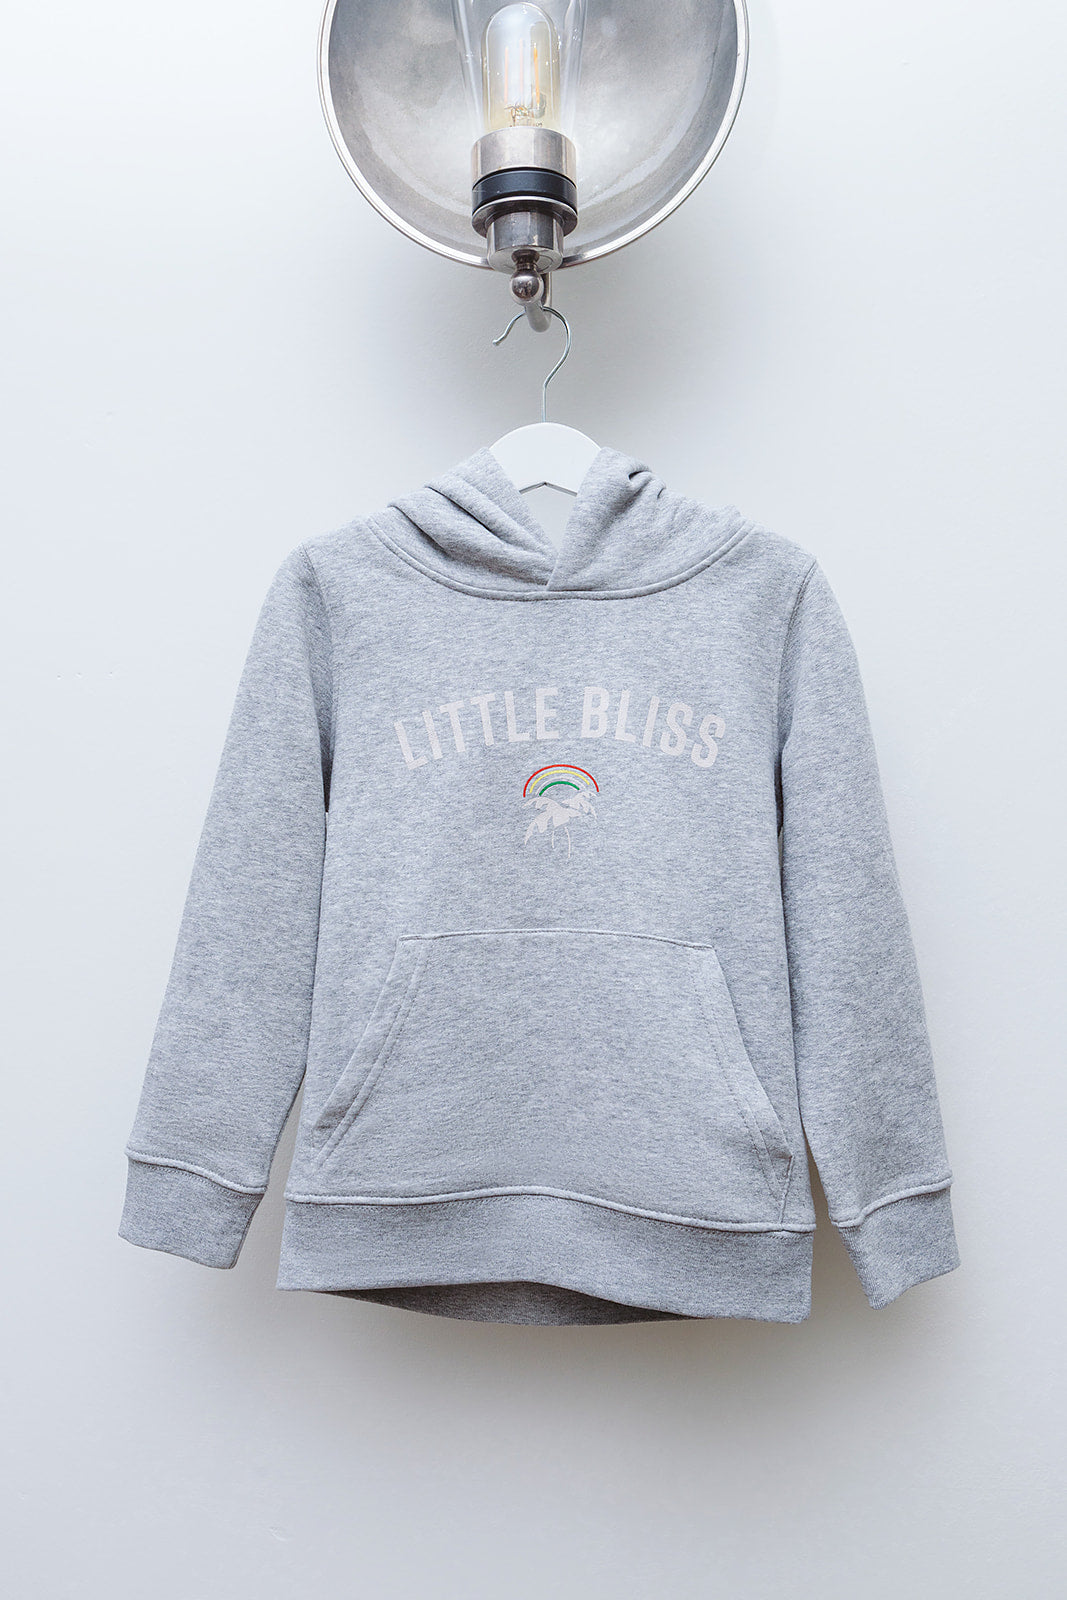 Little Bliss by Anna Daly The Kids Happy Hoodie in Grey